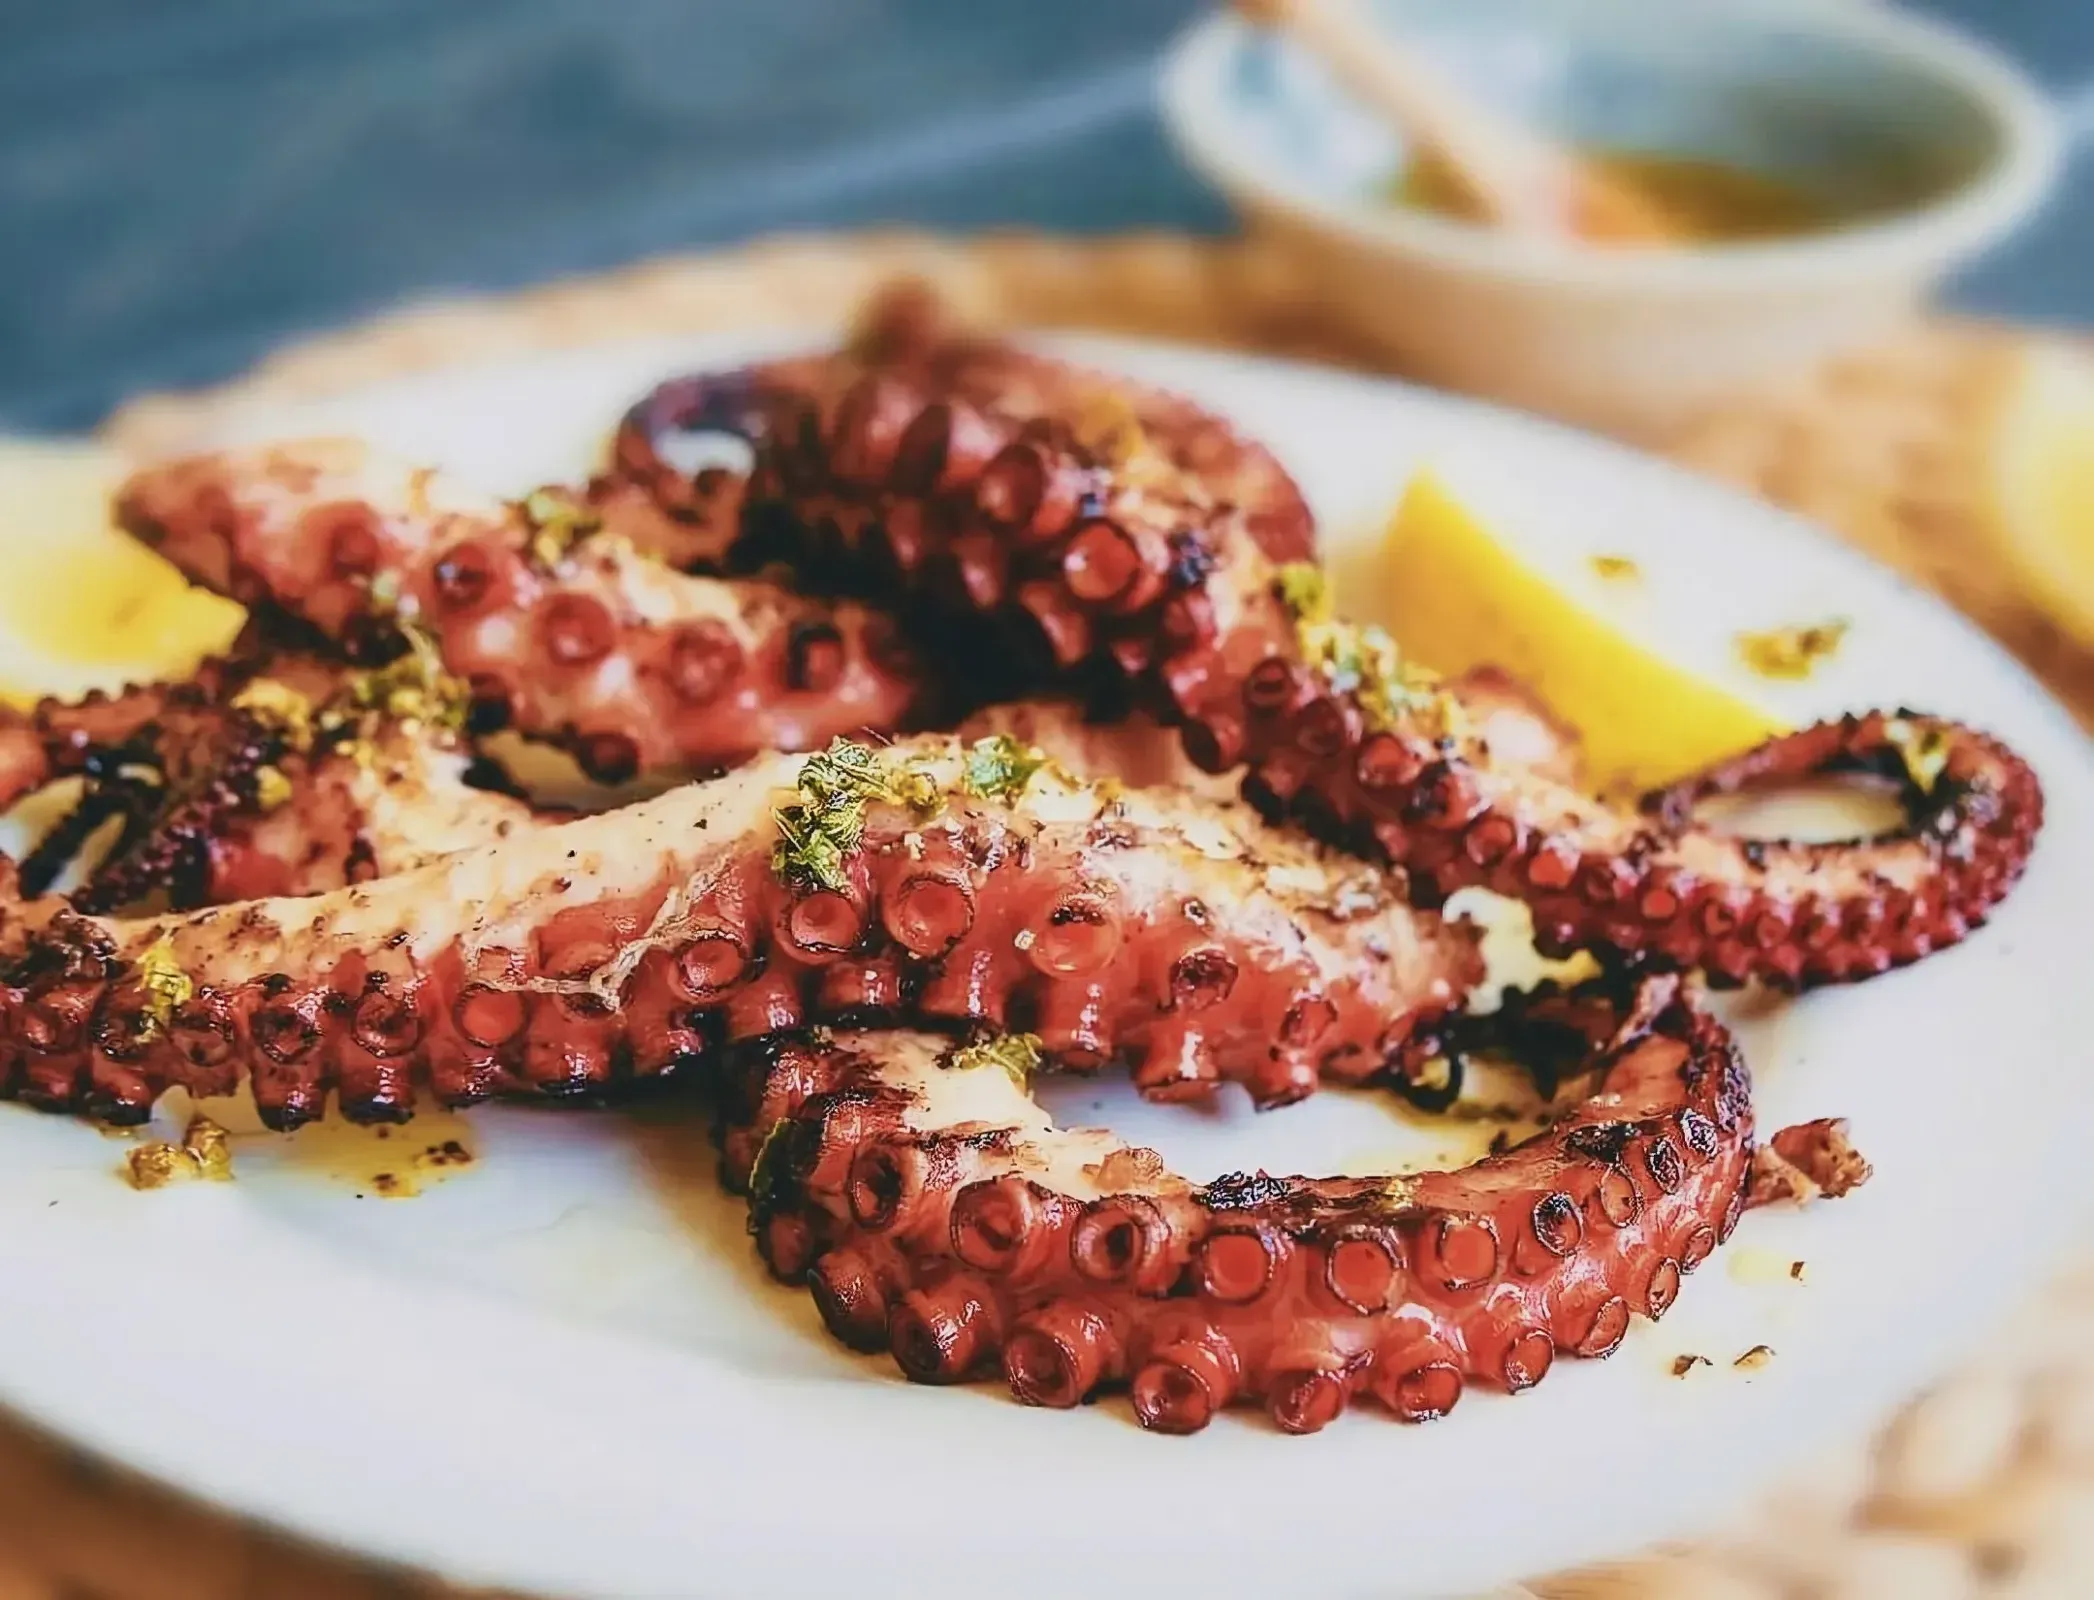 Delicately prepared dish of cooked octopus served on a plate